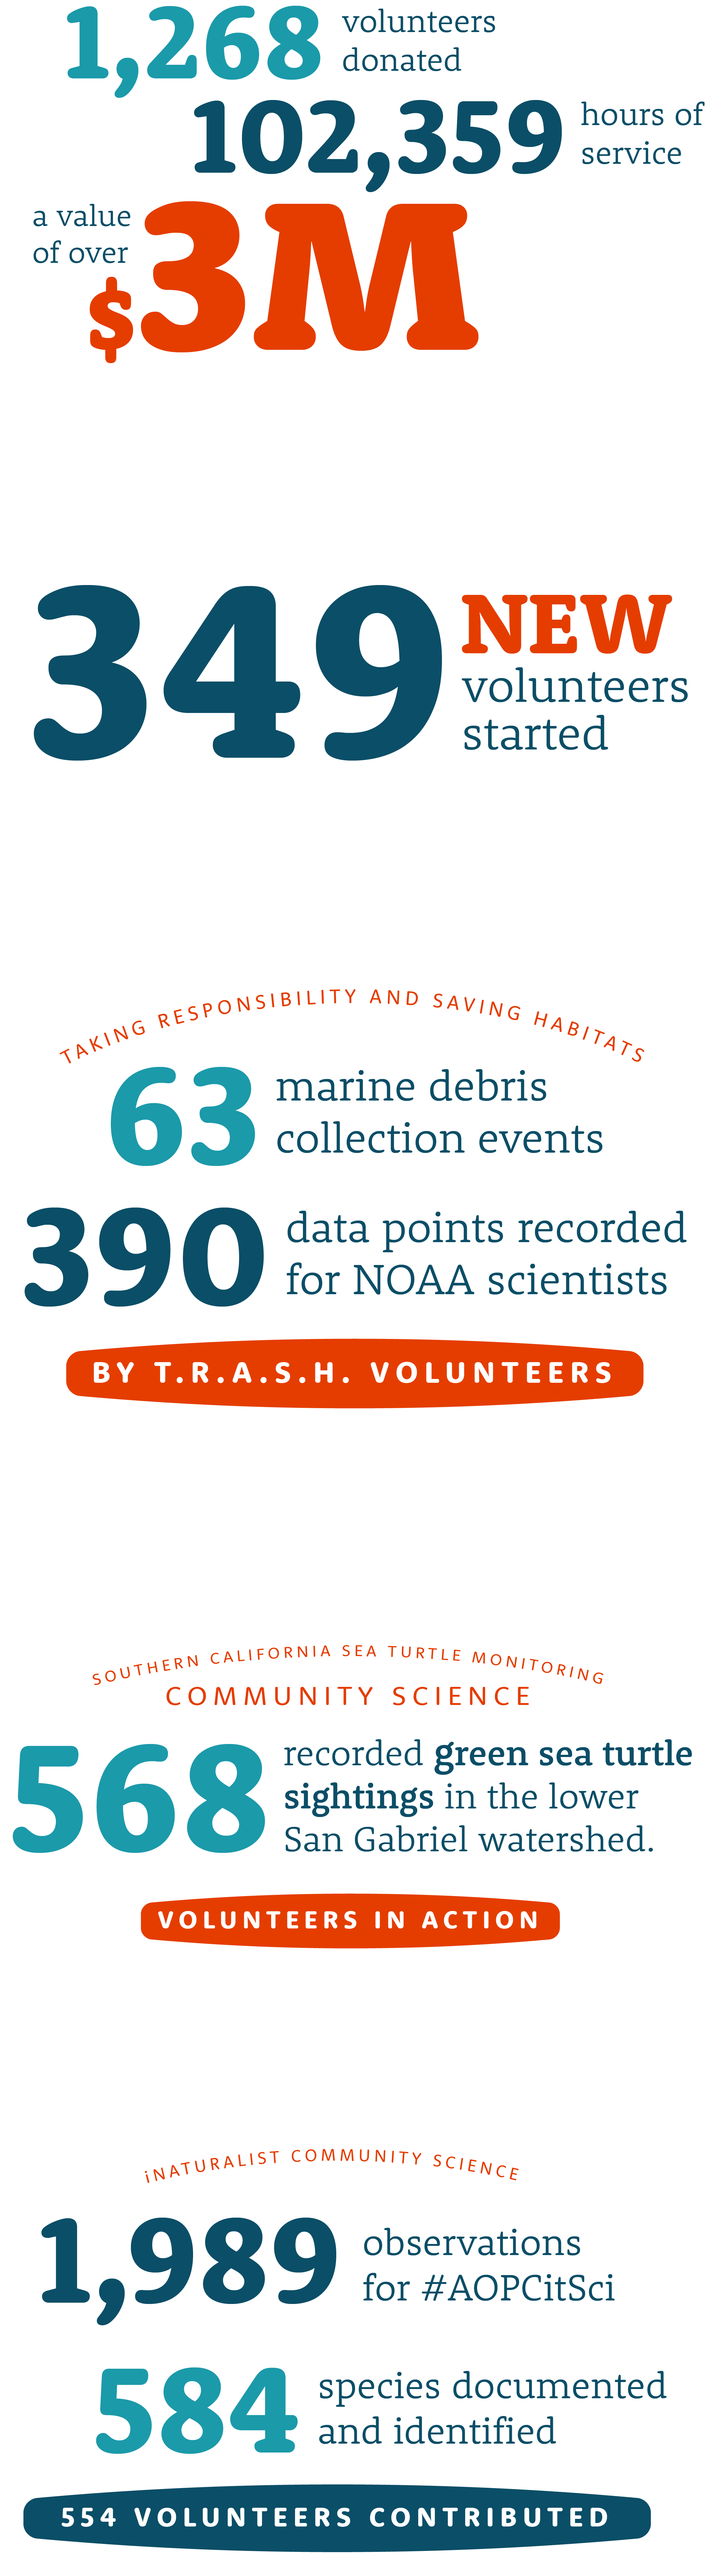 Volunteer infographic - 1,268 volunteers donated - 102,359 hours of service, a value over $3 million - 349 new volunteers started - taking responsibility and saving habitats - 63 marine debris collection events - 390 data points recorded for NOAA scientists by T.R.A.S.H. volunteers - Southern California Sea Turtle Monitoring Community Science - 568 recorded sea turtle sightings in the lower San Gabriel watershed - Volunteers In Action - iNaturalist Community Science 1,989 observations for #AOPCitSci 584 species documented and identified - 554 volunteers contributed